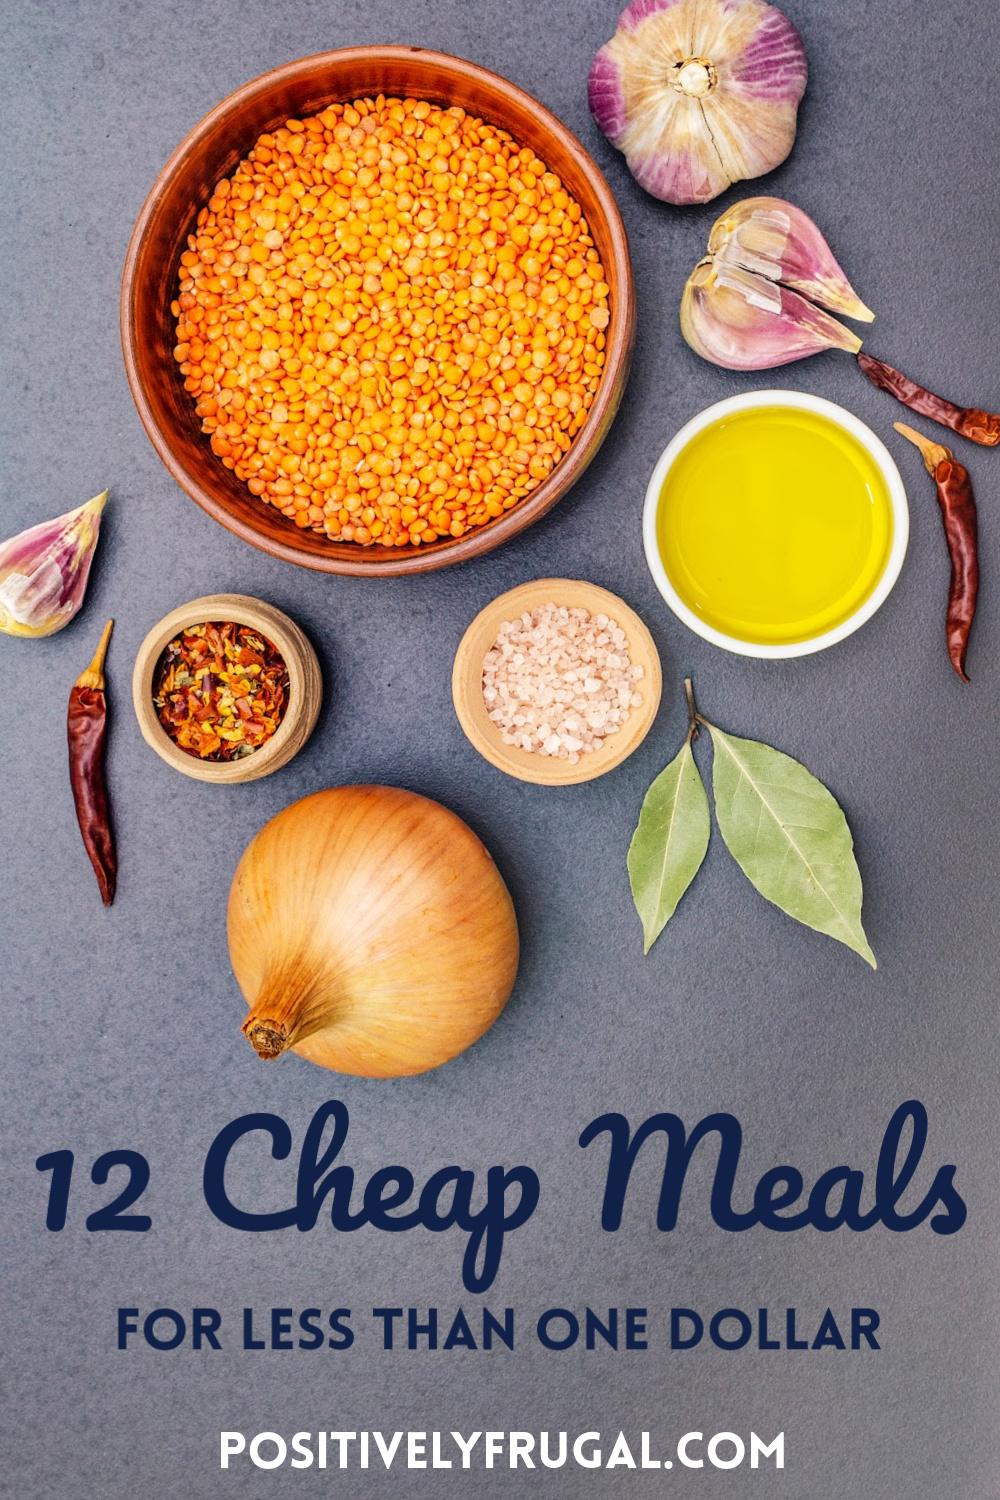 12 Cheap Meals for Less than One Dollar by PositivelyFrugal.com